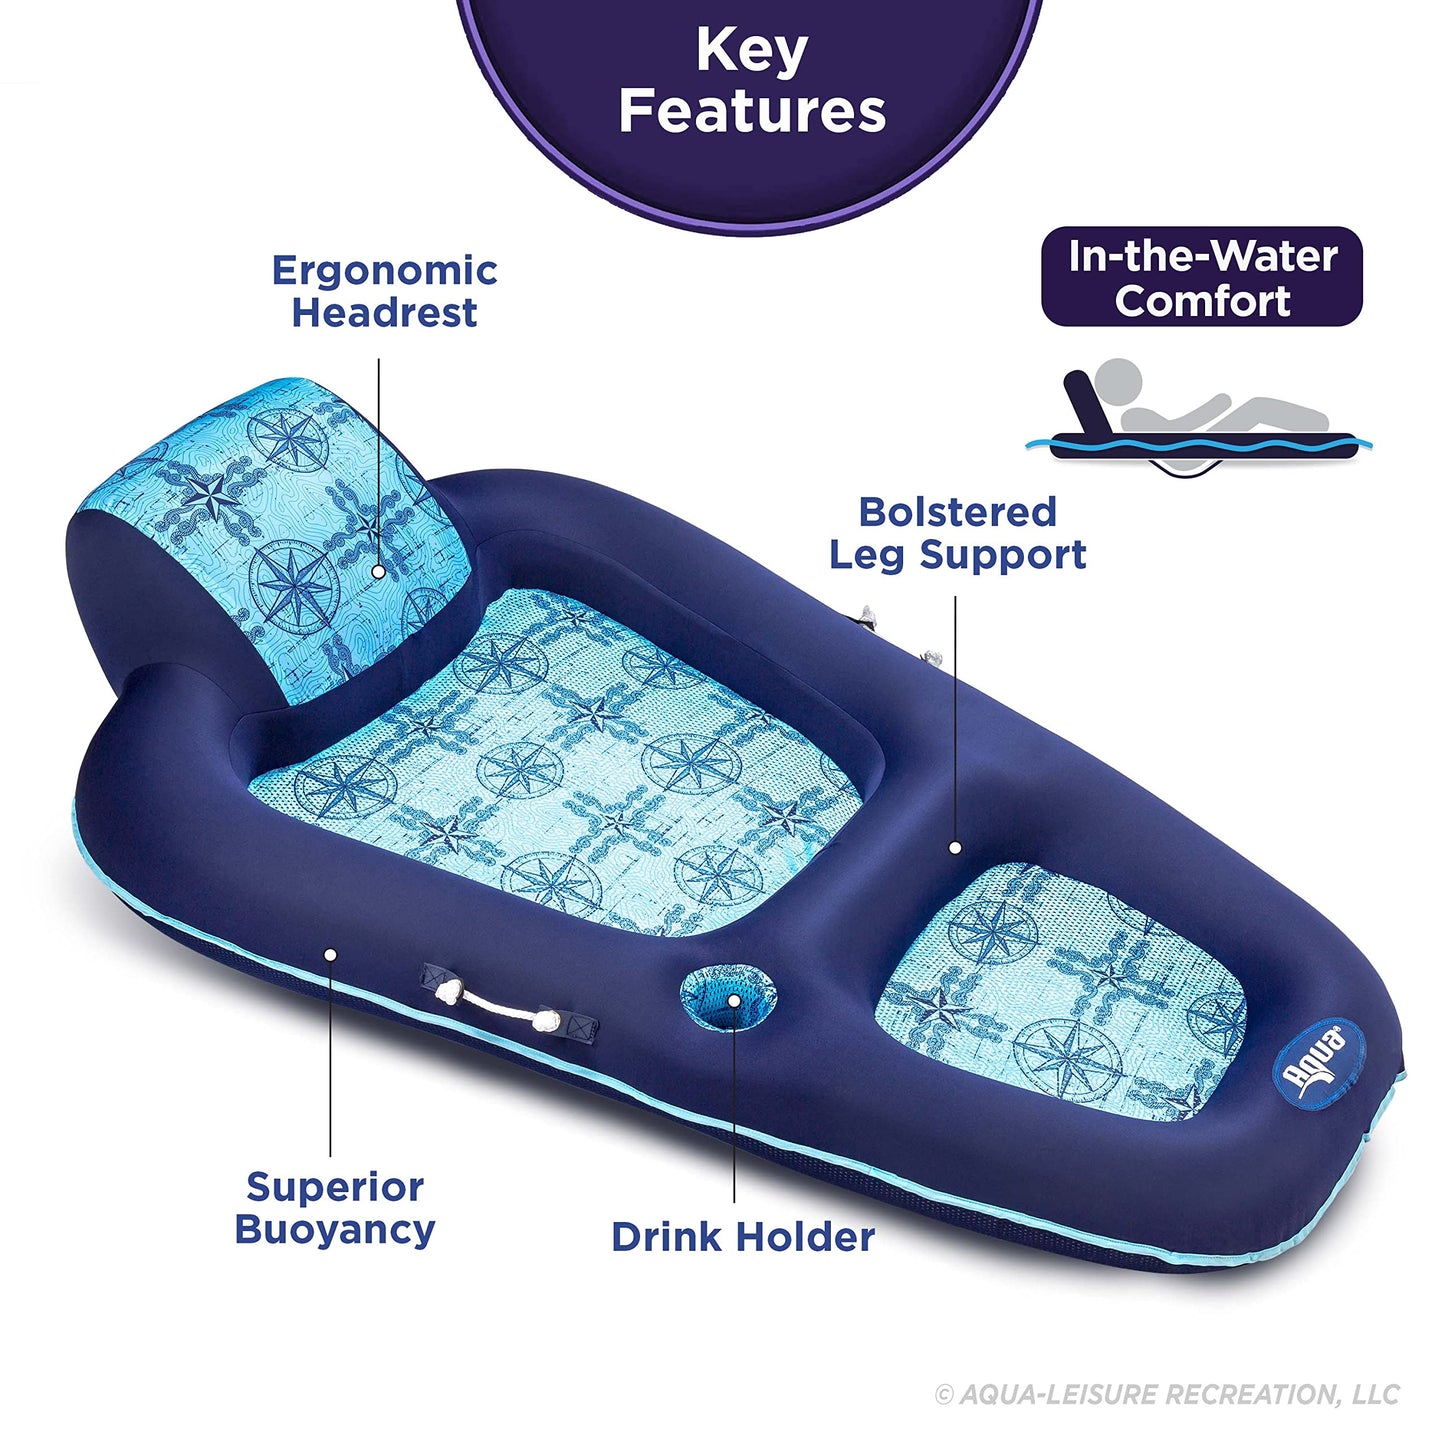 Aqua Ultimate Pool Float Lounges, Recliners, Tanners – Multiple Colors/Styles – for Adults and Kids Floating XL Lounge Navy/Light Blue